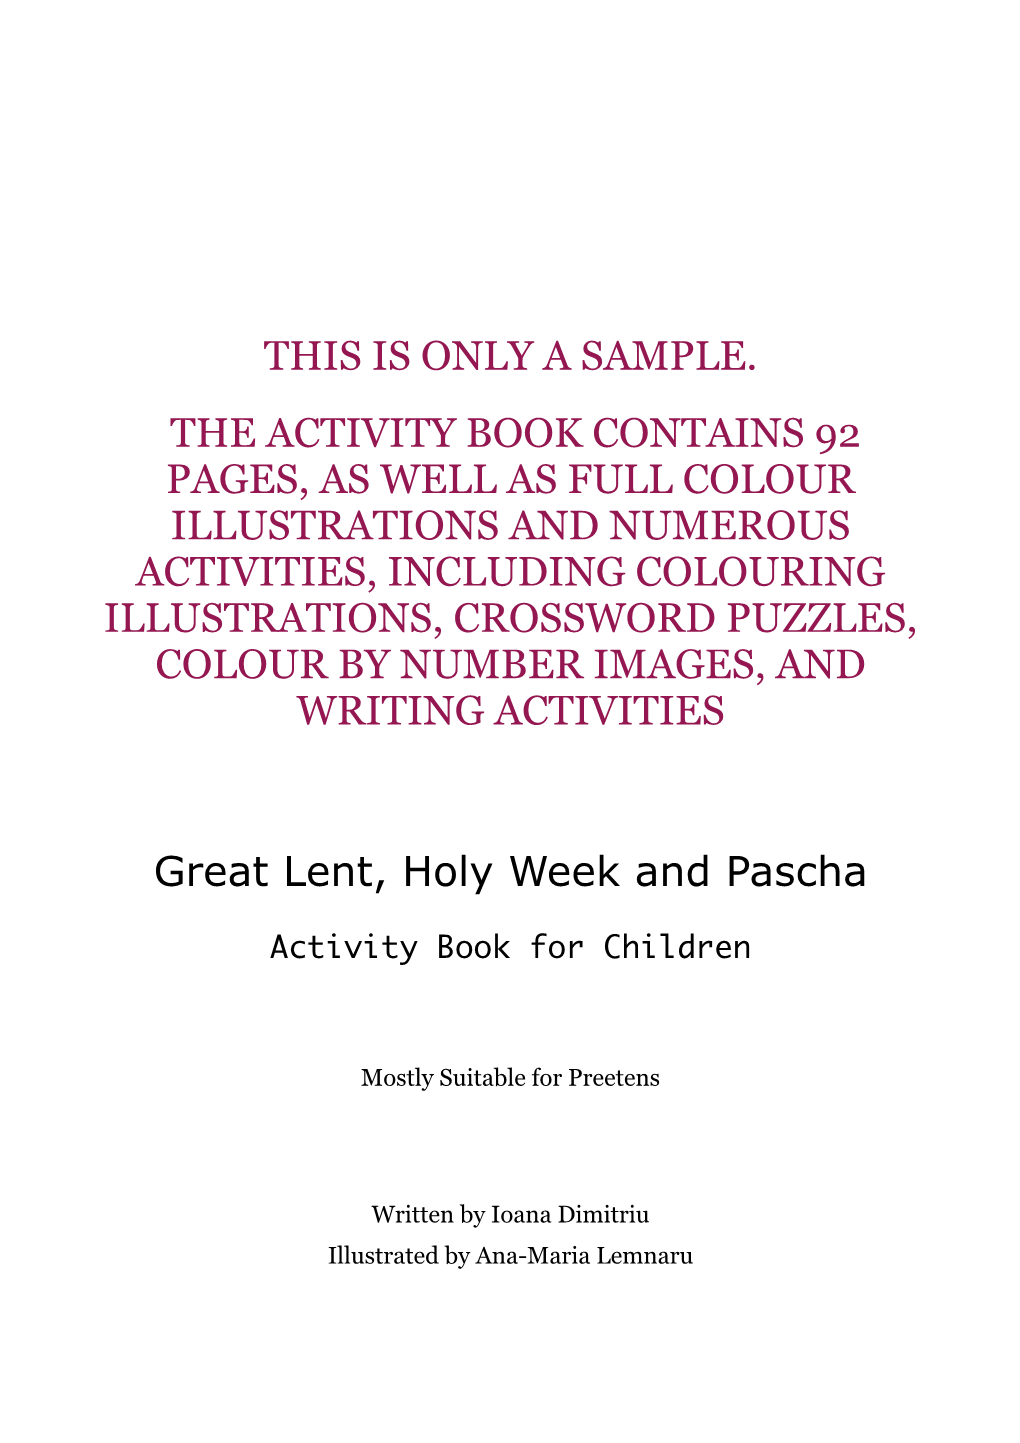 Great Lent, Holy Week and Pascha for Children 2Nd Ed Sample 2021